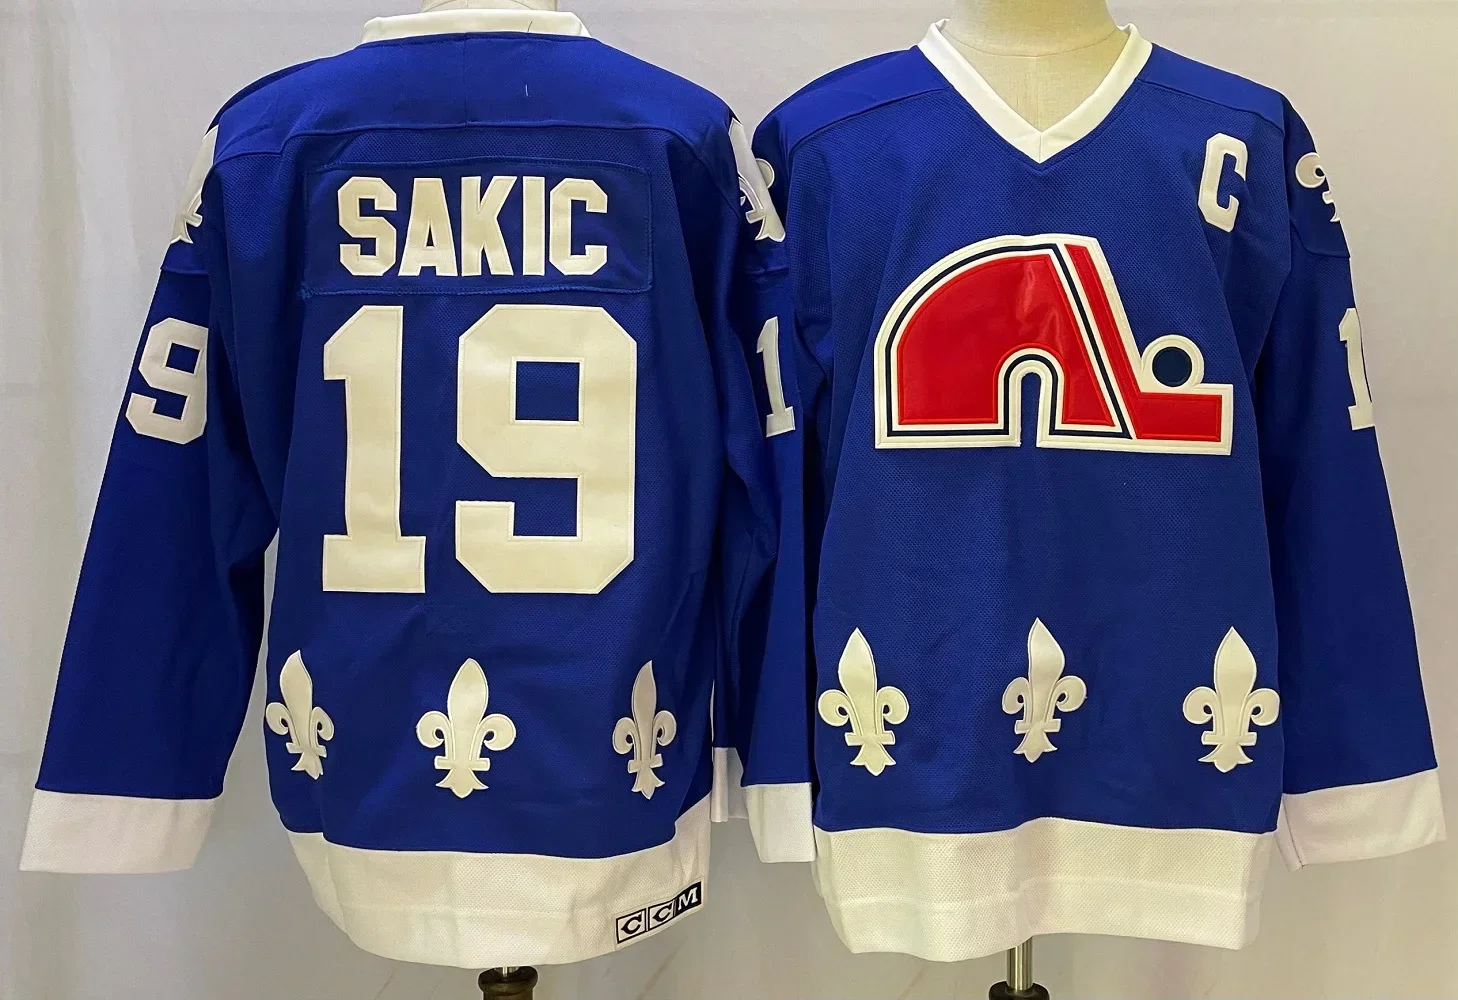 

Joe Sakic Jersey Quebec Ice Hockey Jersey 19 Old Team Retro Classic Sweater Stitched Letters Numbers US Size More Color S-XXXL